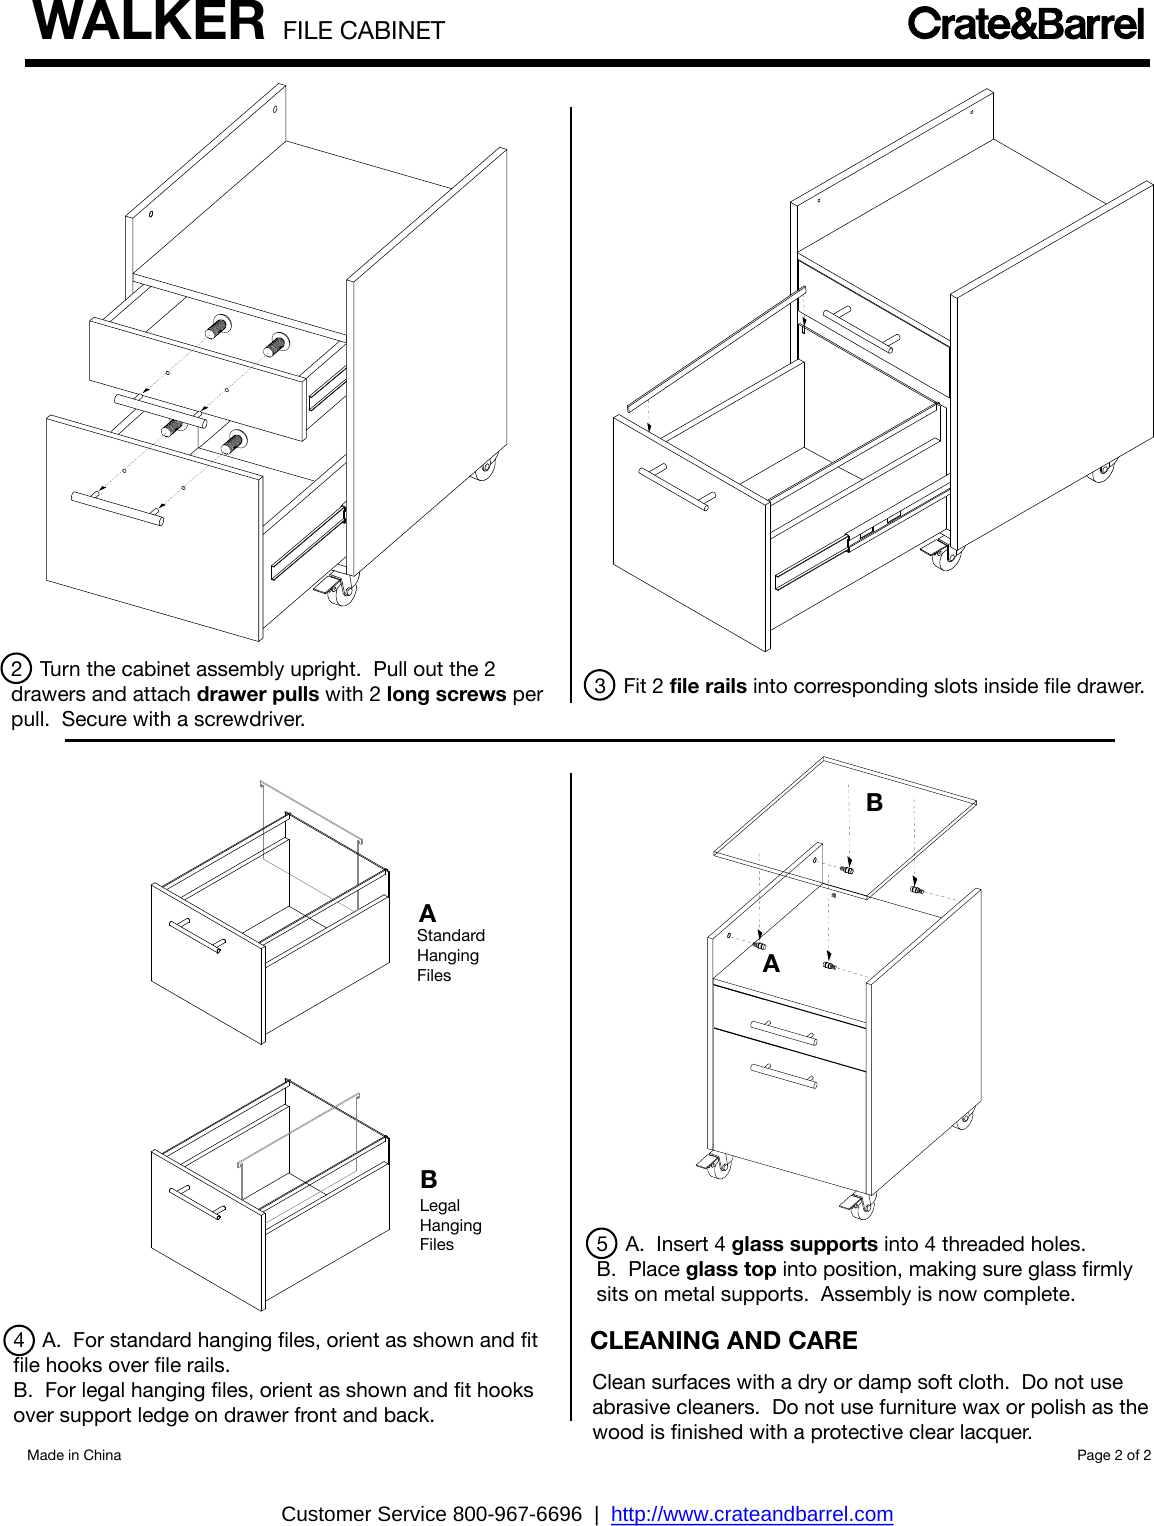 Crate Barrel 1045 Walker File Cabinet Assembly Instructions From And